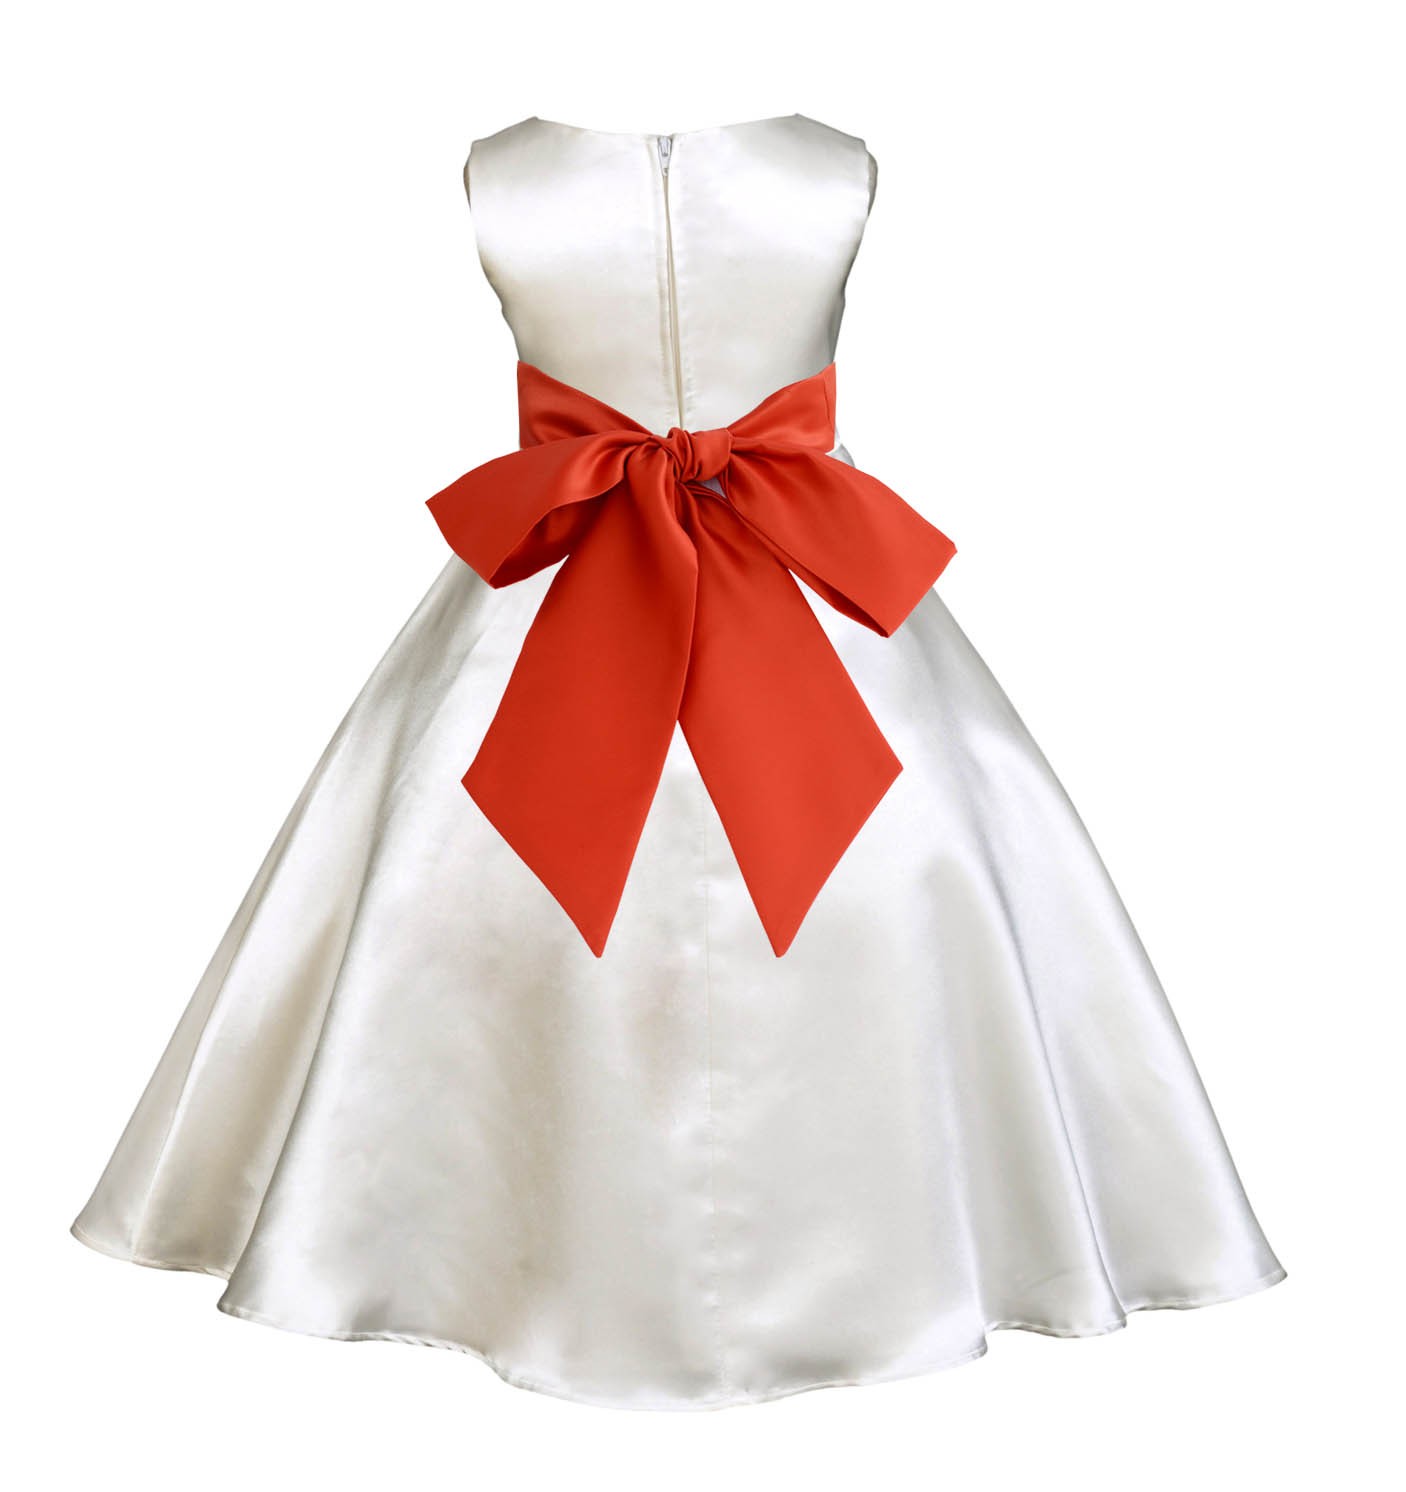 Ivory/Persimmon A-Line Satin Flower Girl Dress Pageant Reception 821S